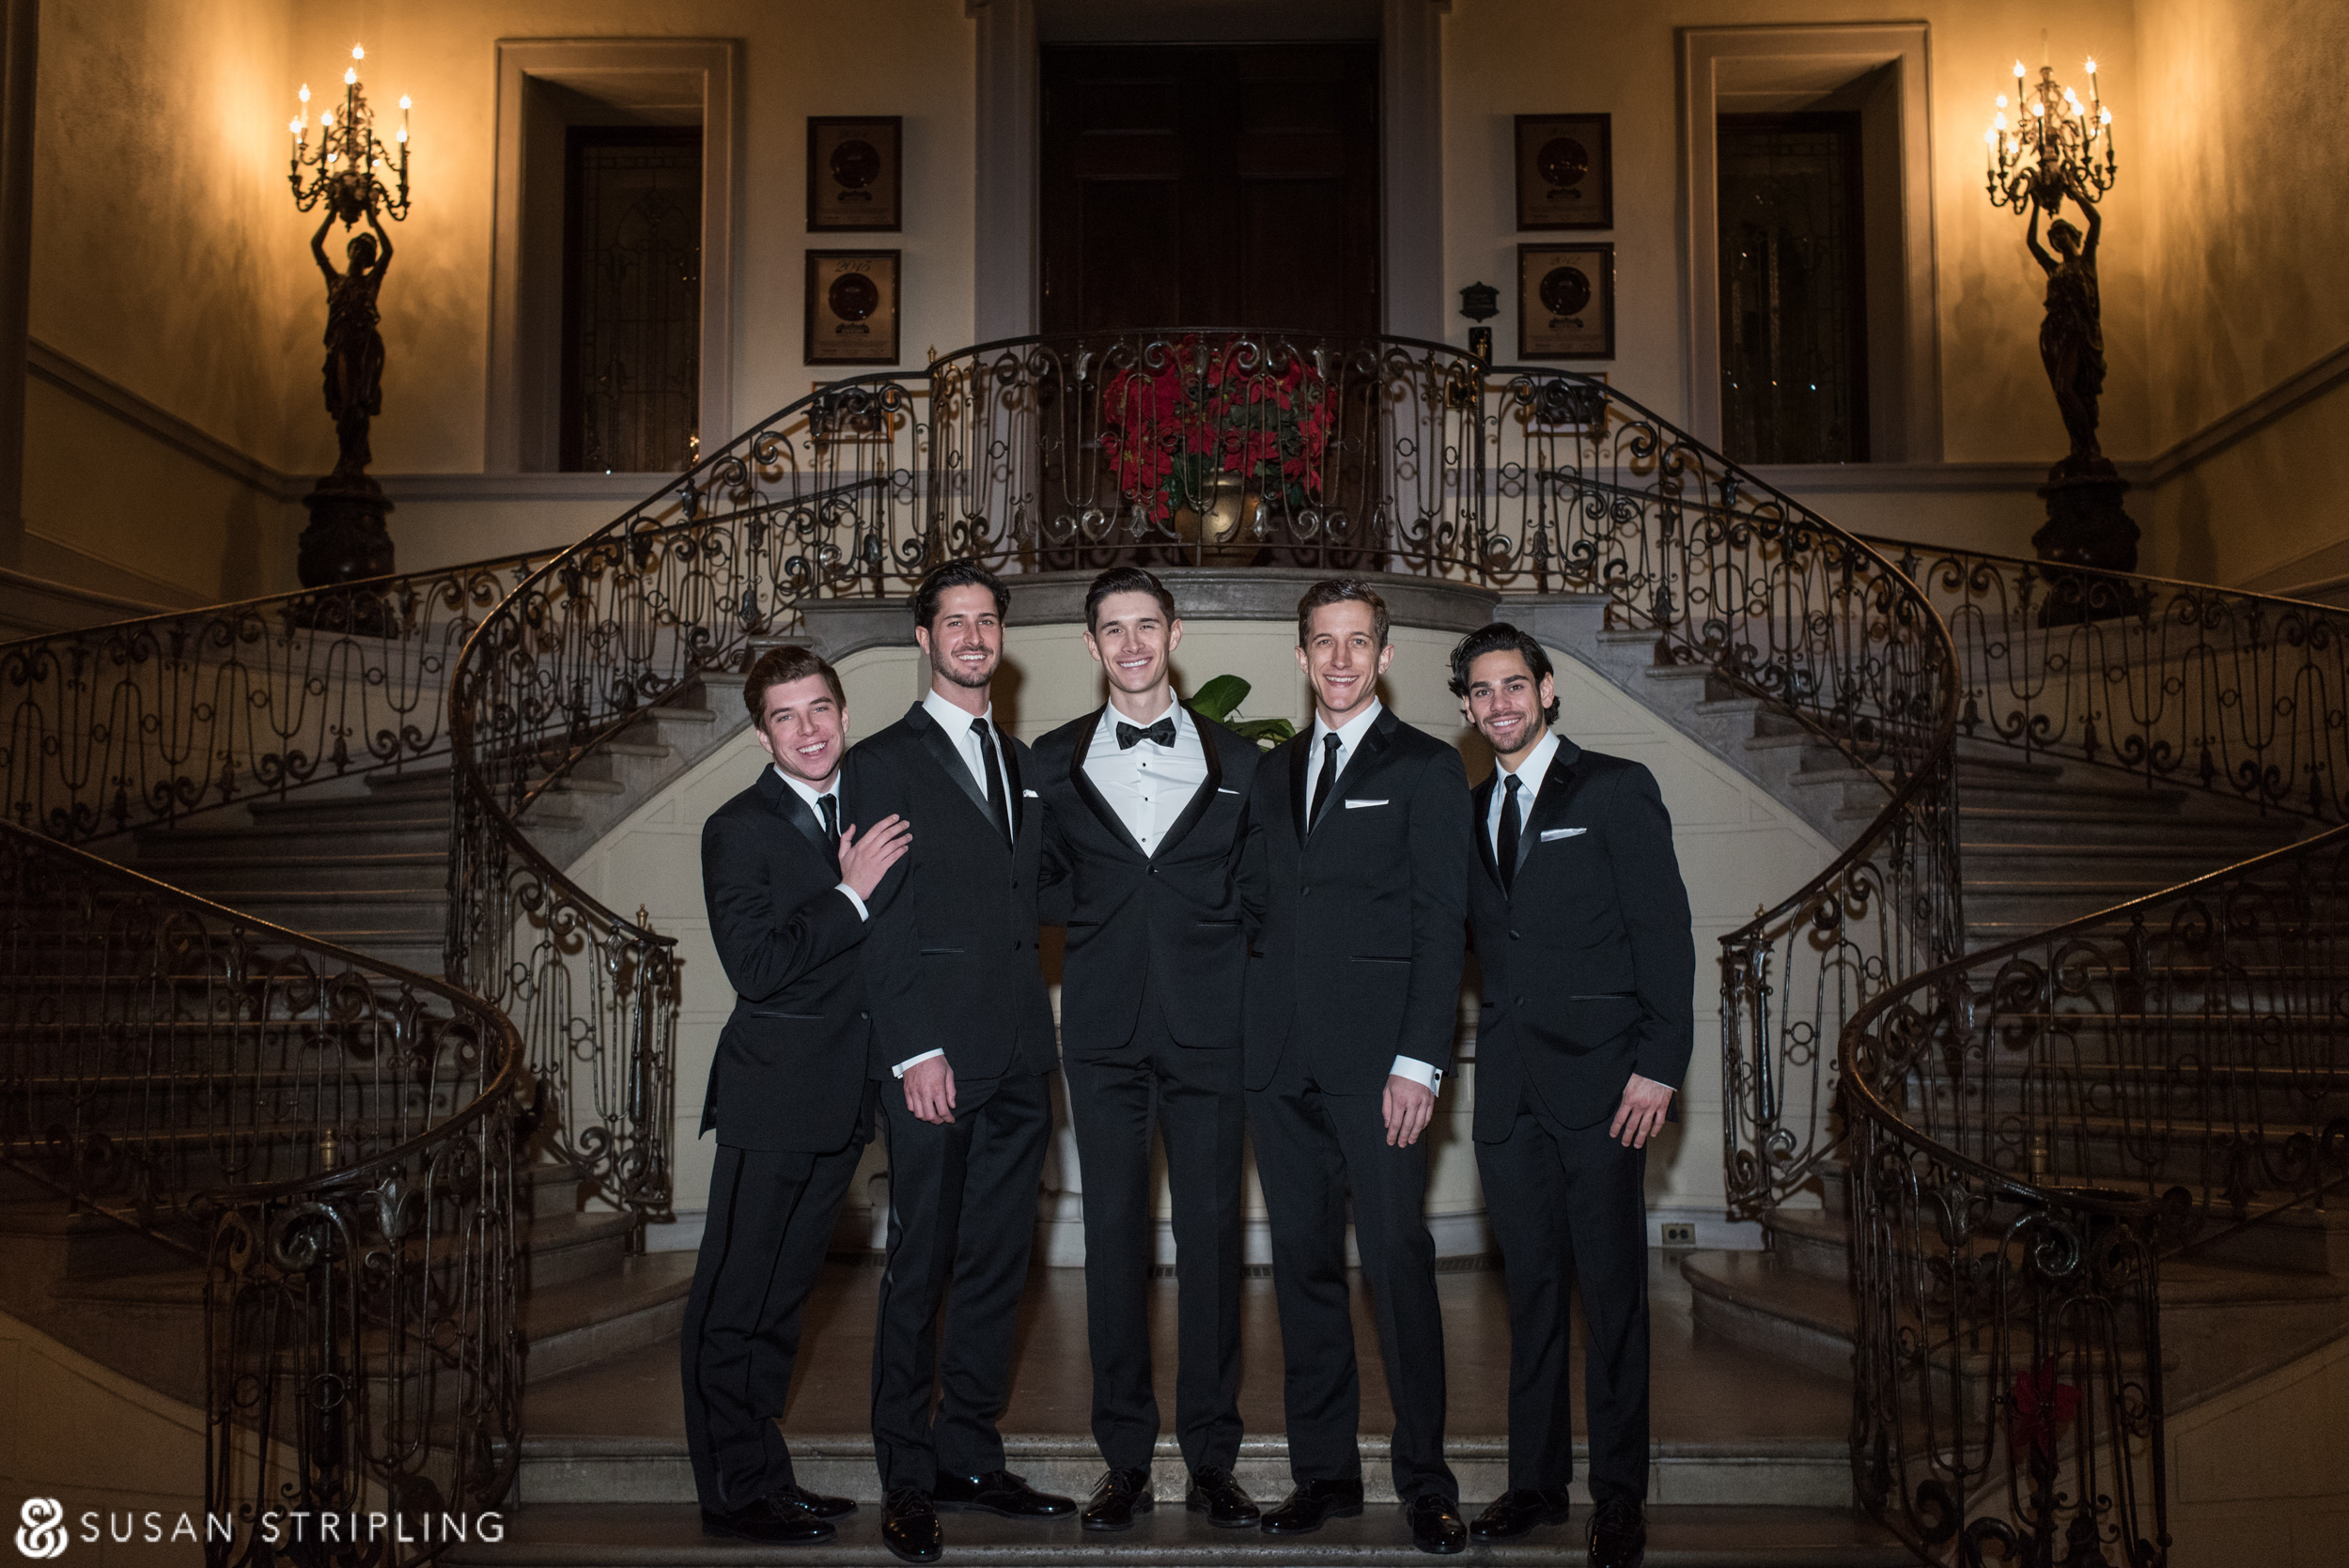 A group of groomsmen in tuxedos posing in front of a staircase during family pictures at a wedding.